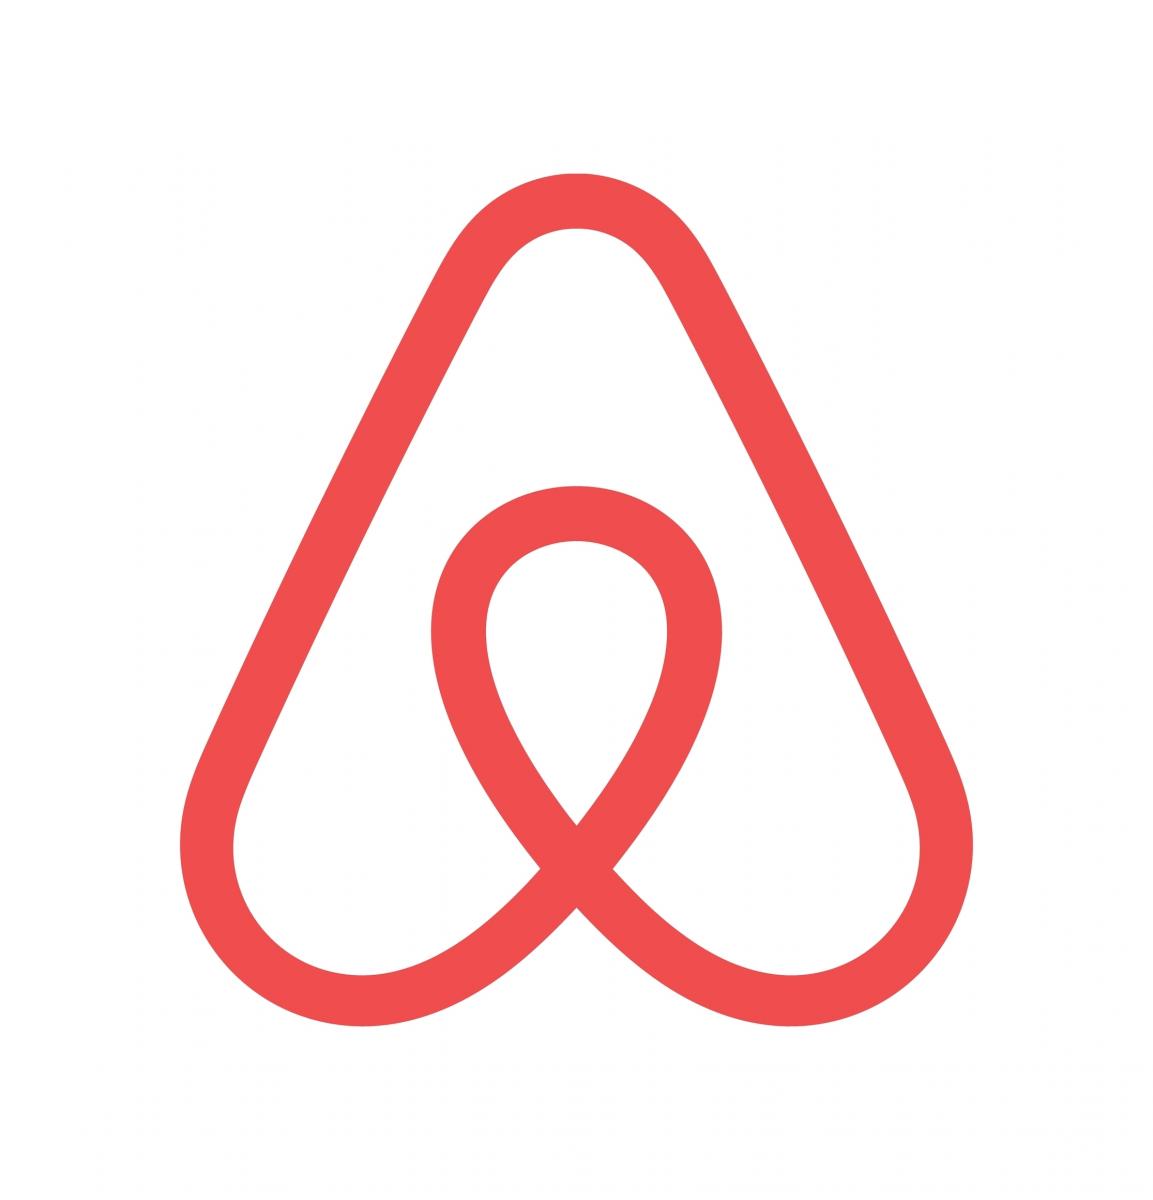 Airbnb woos Labour saying short lets can be “lifeline”